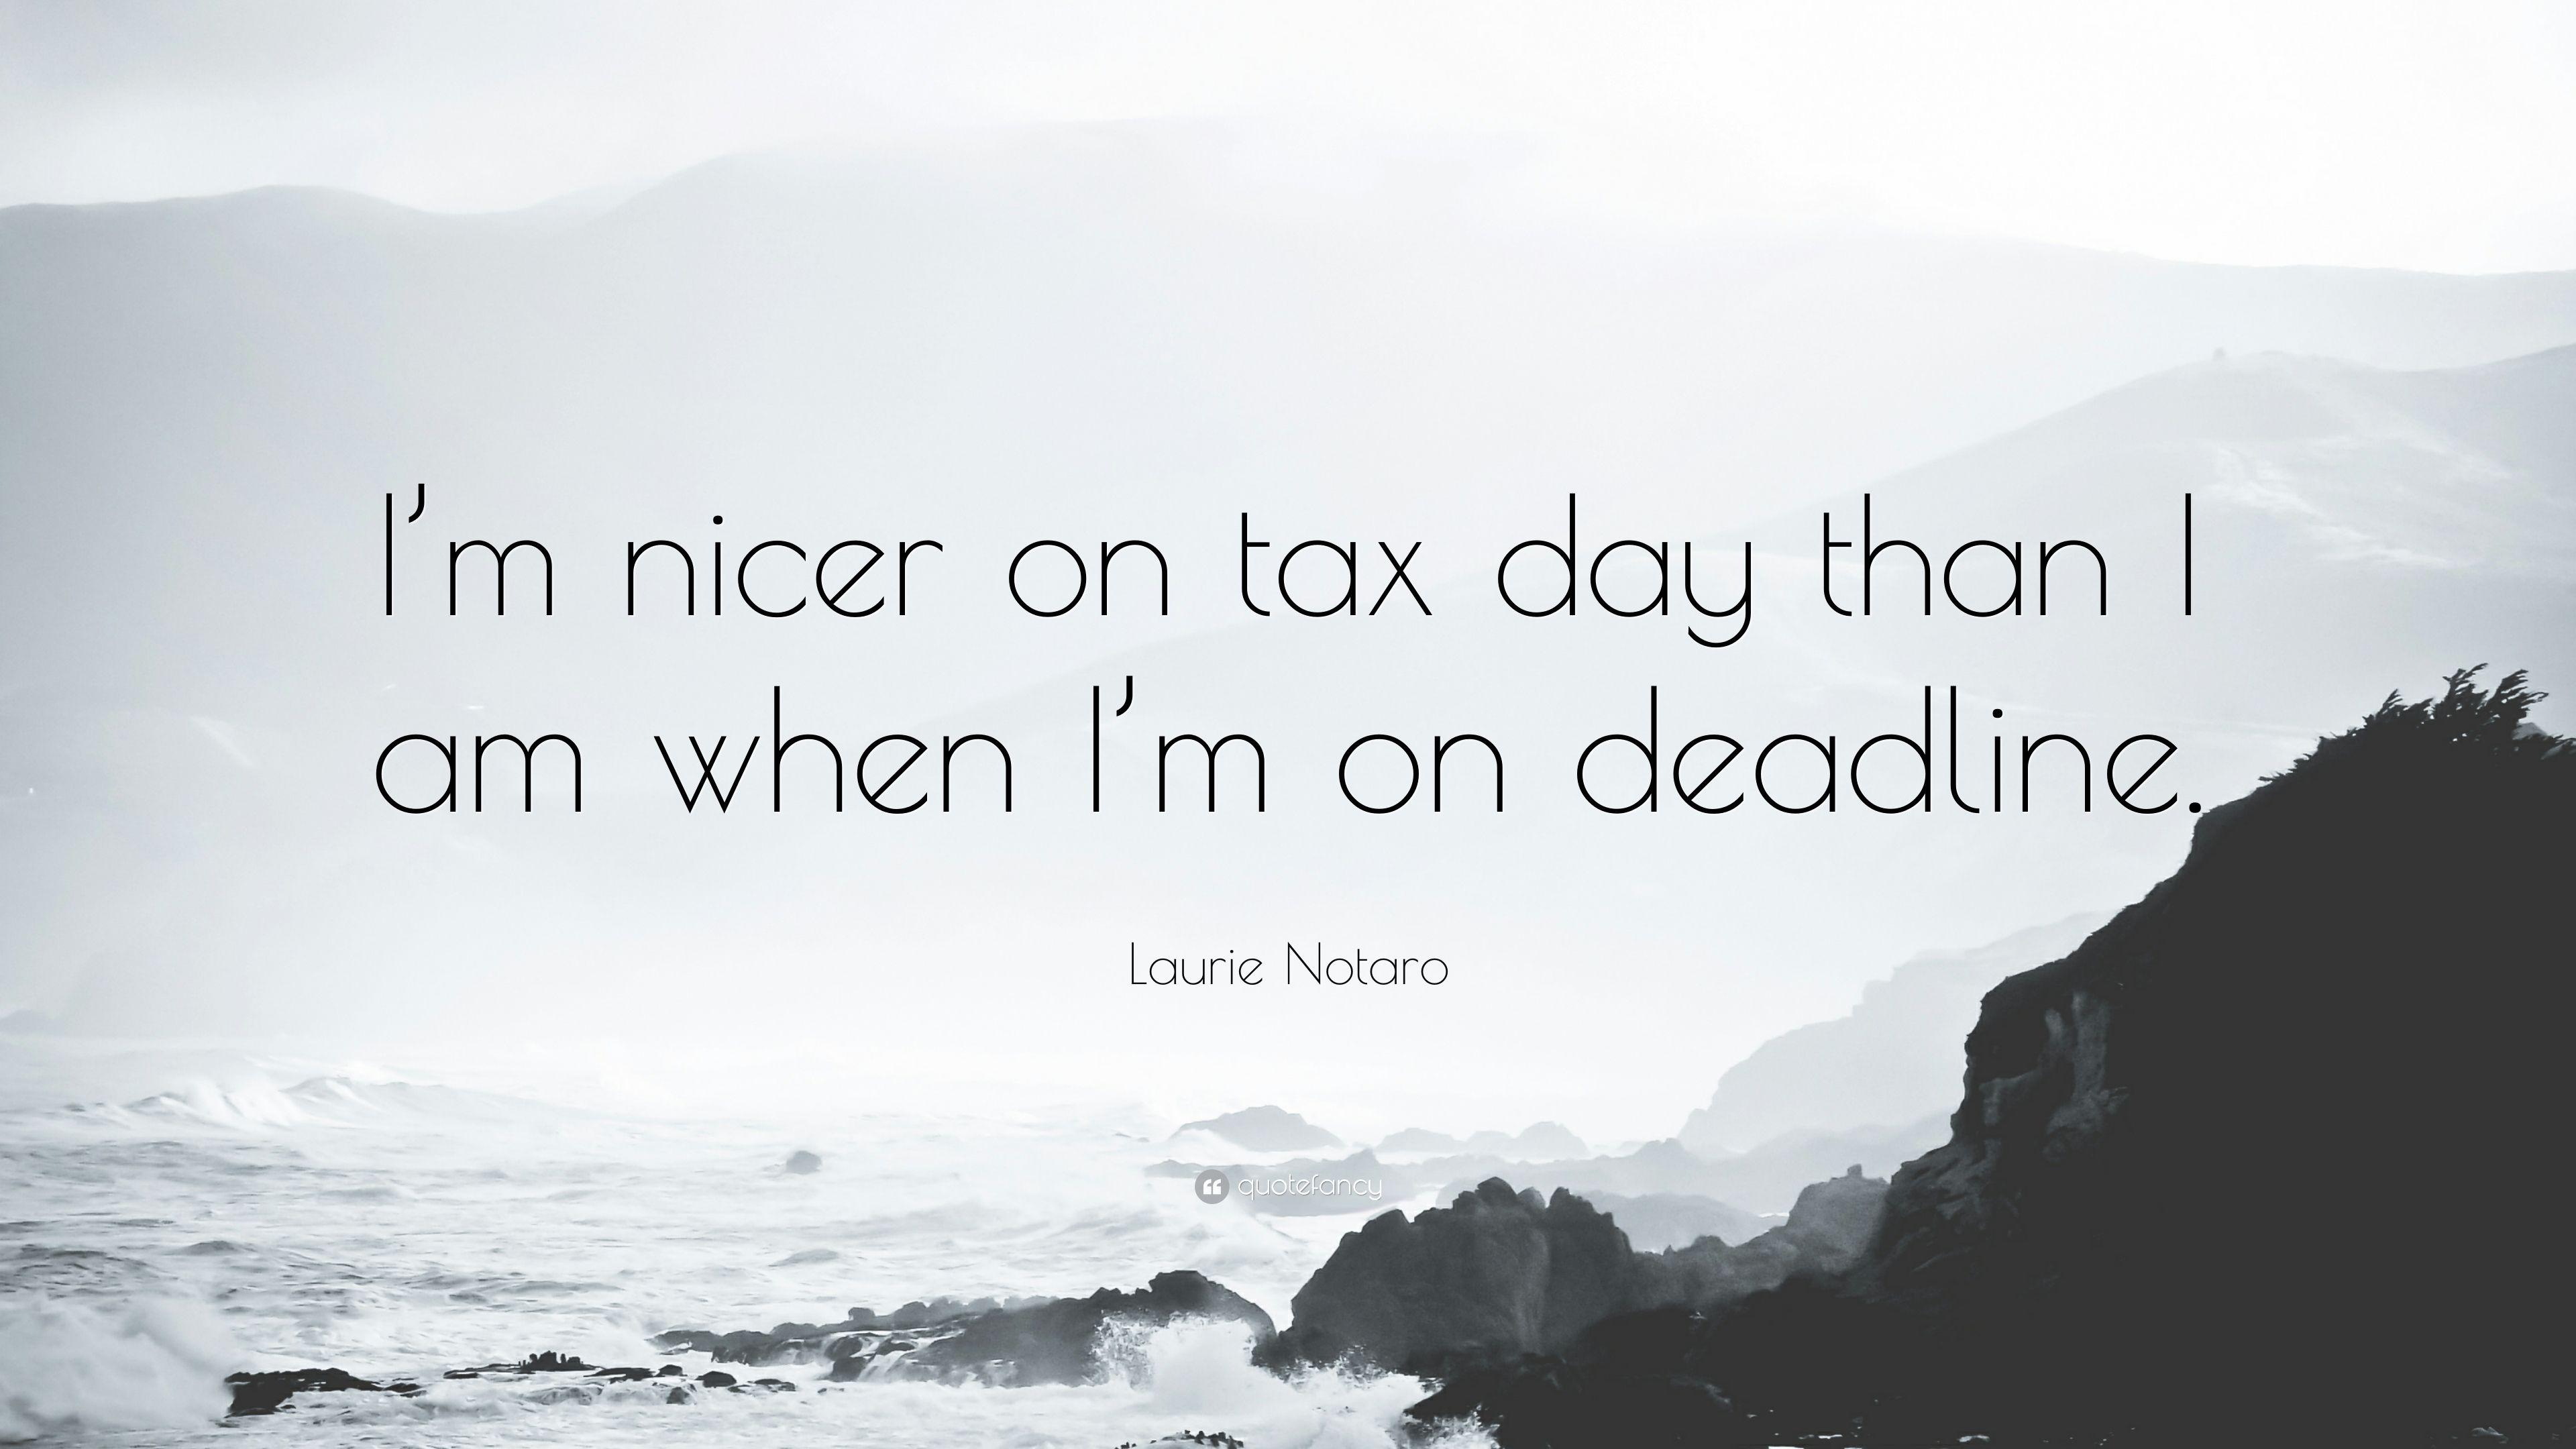 Laurie Notaro Quote: “I'm nicer on tax day than I am when I'm